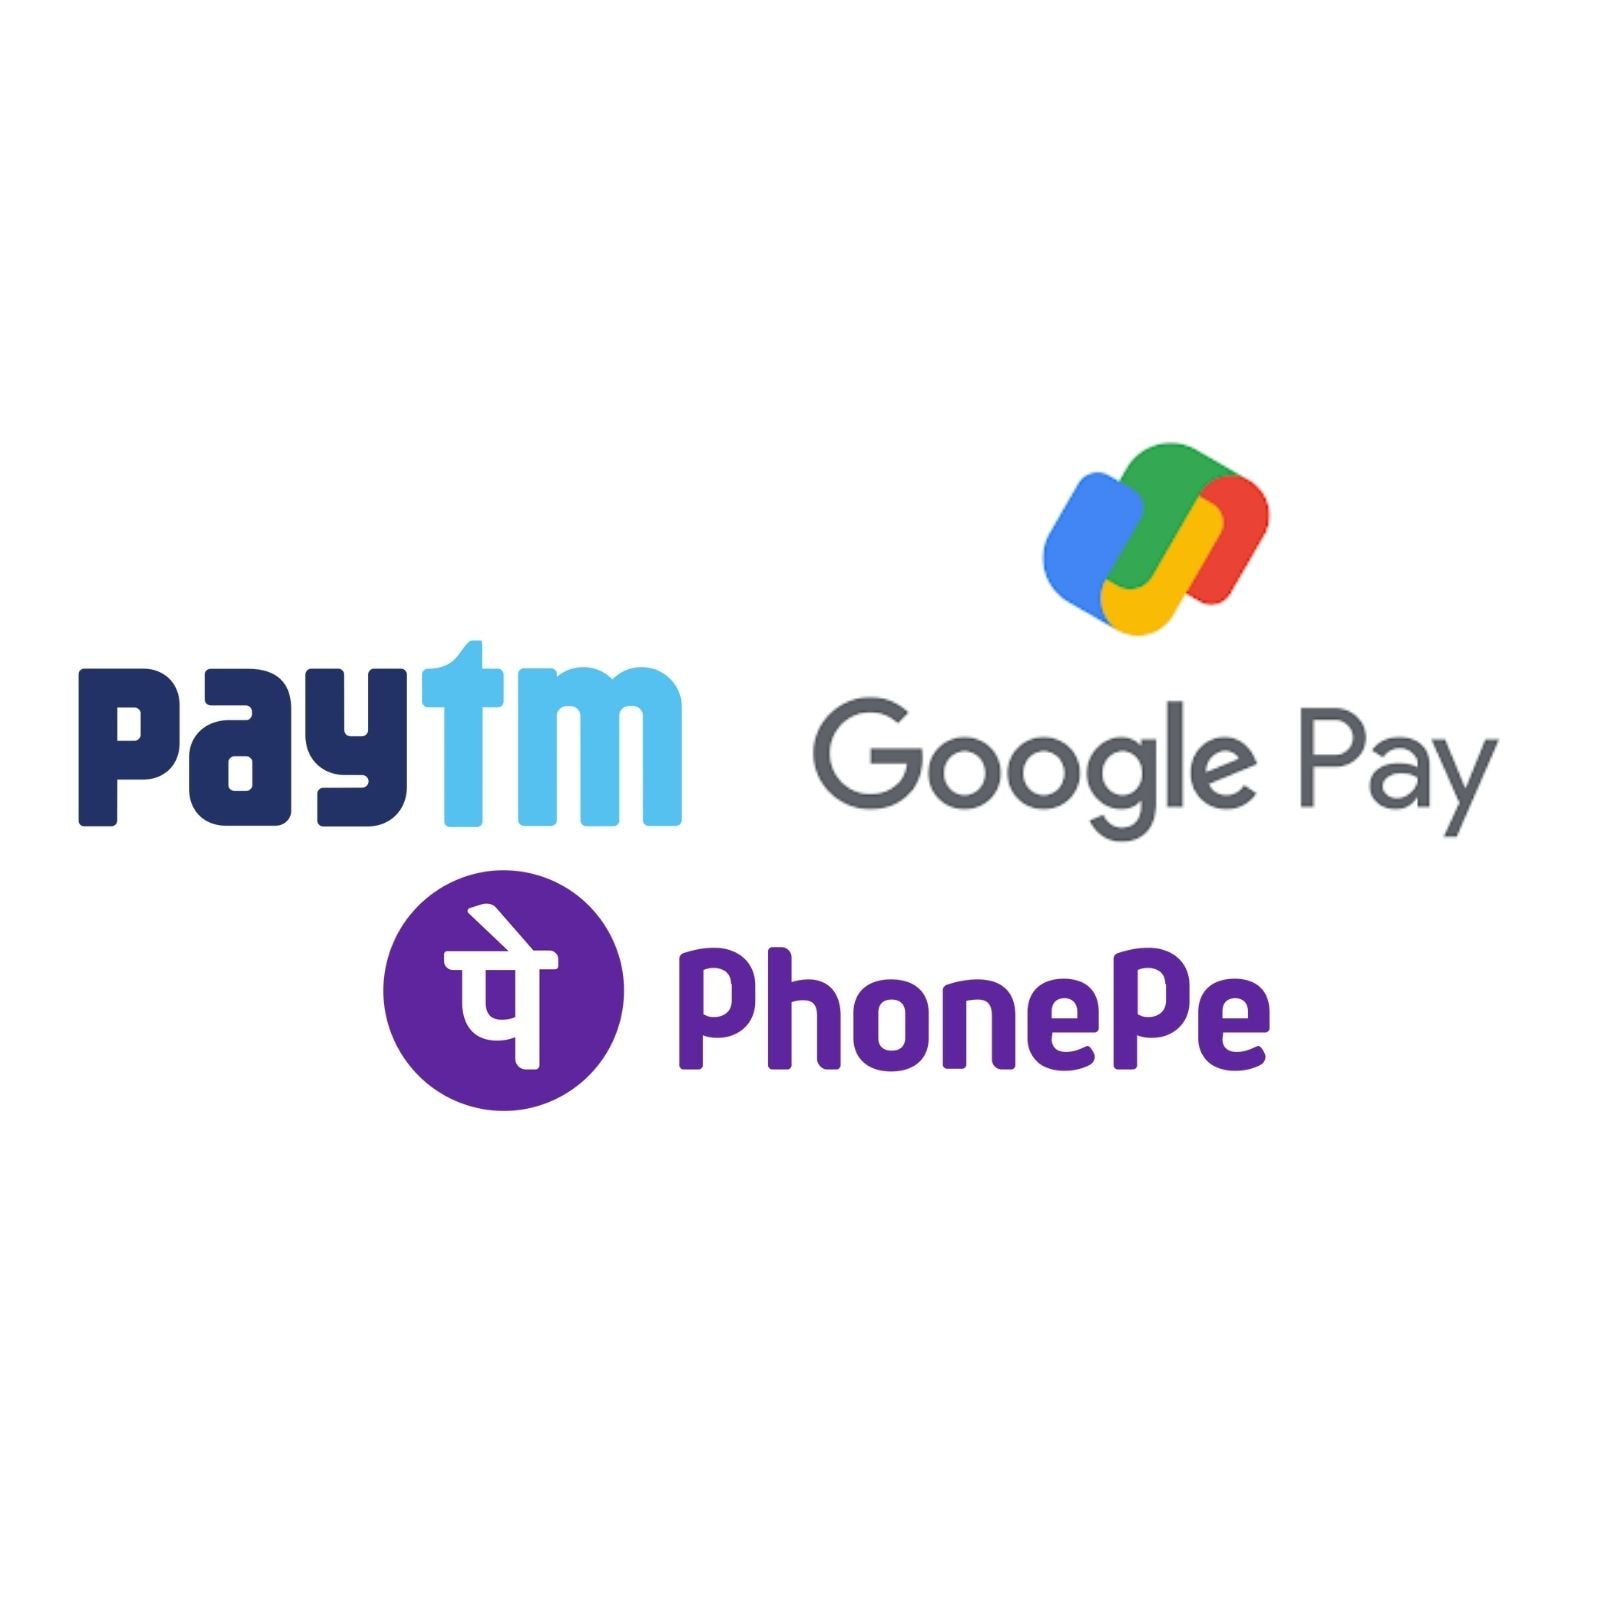 Paytm vs PhonePe vs Google Pay: Which Digital Payment App Should You Use